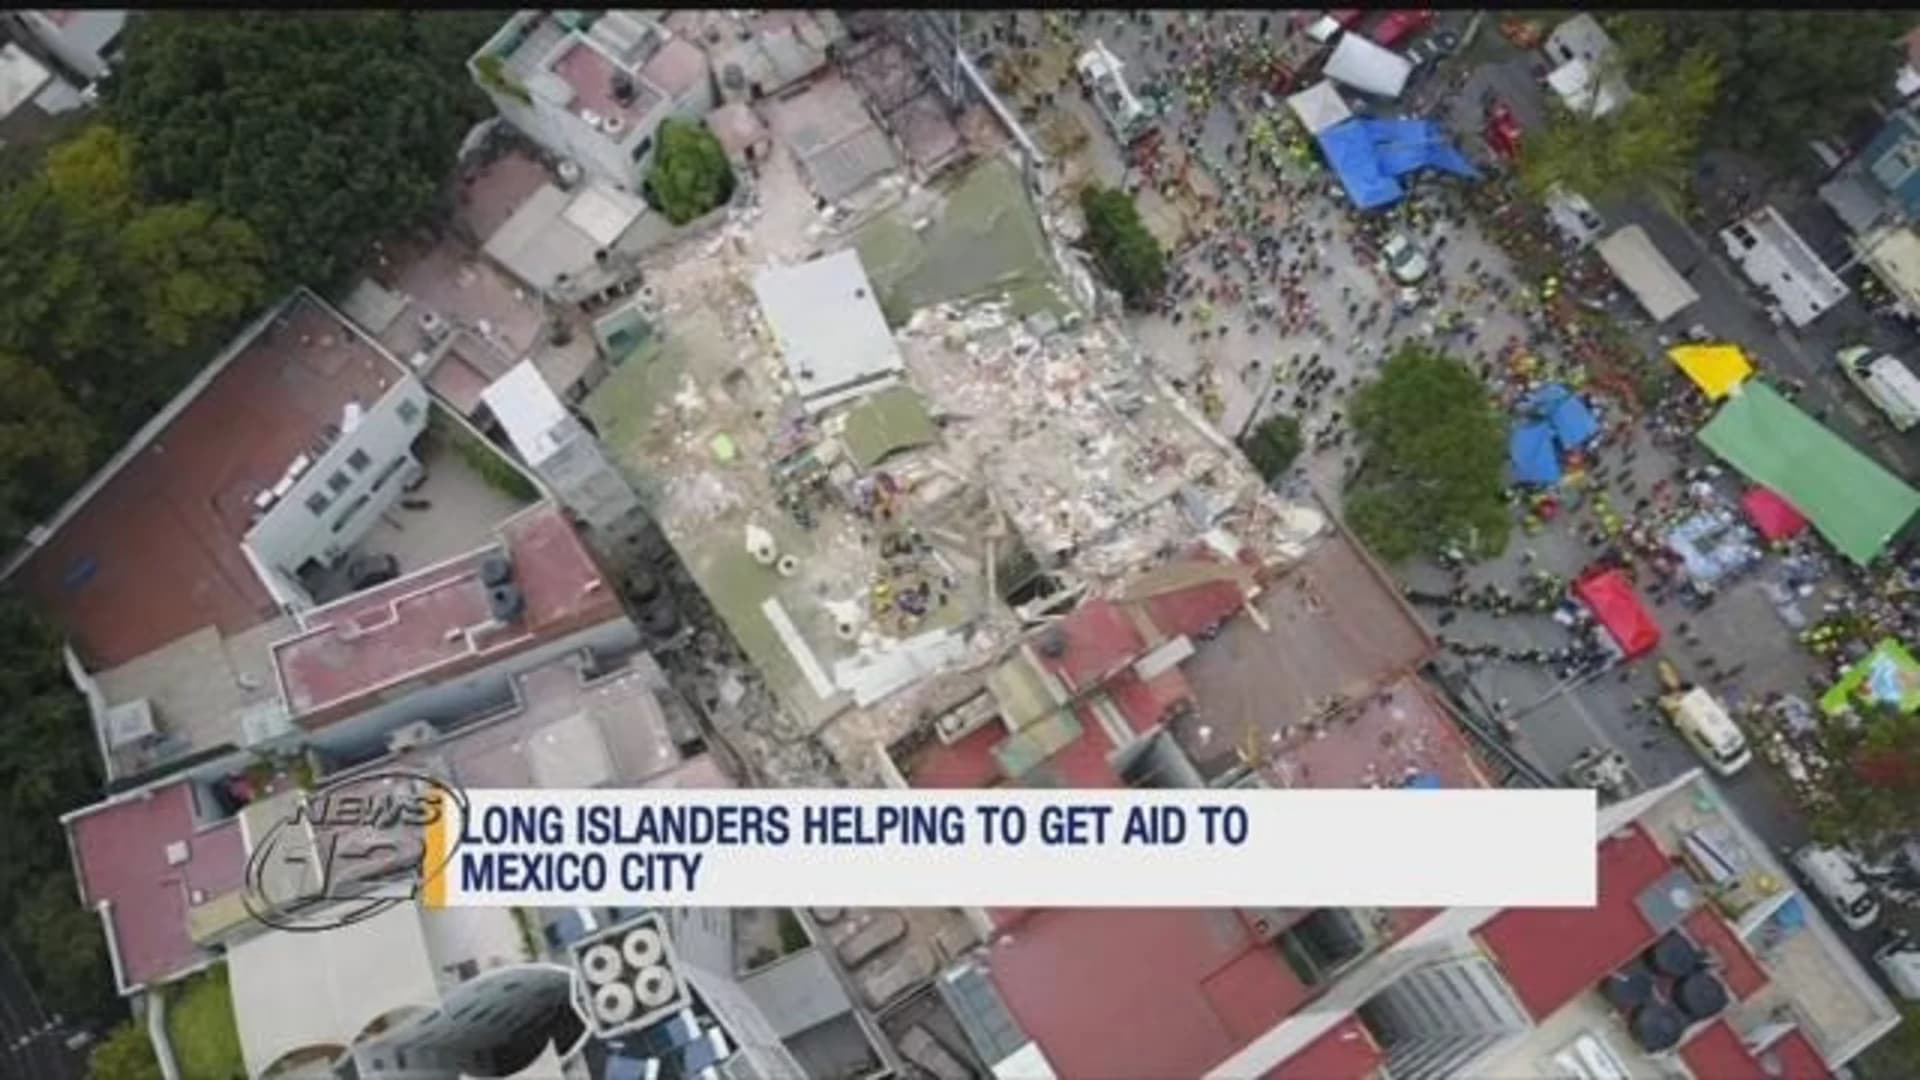 Long Islanders look to aid Mexico following deadly earthquake